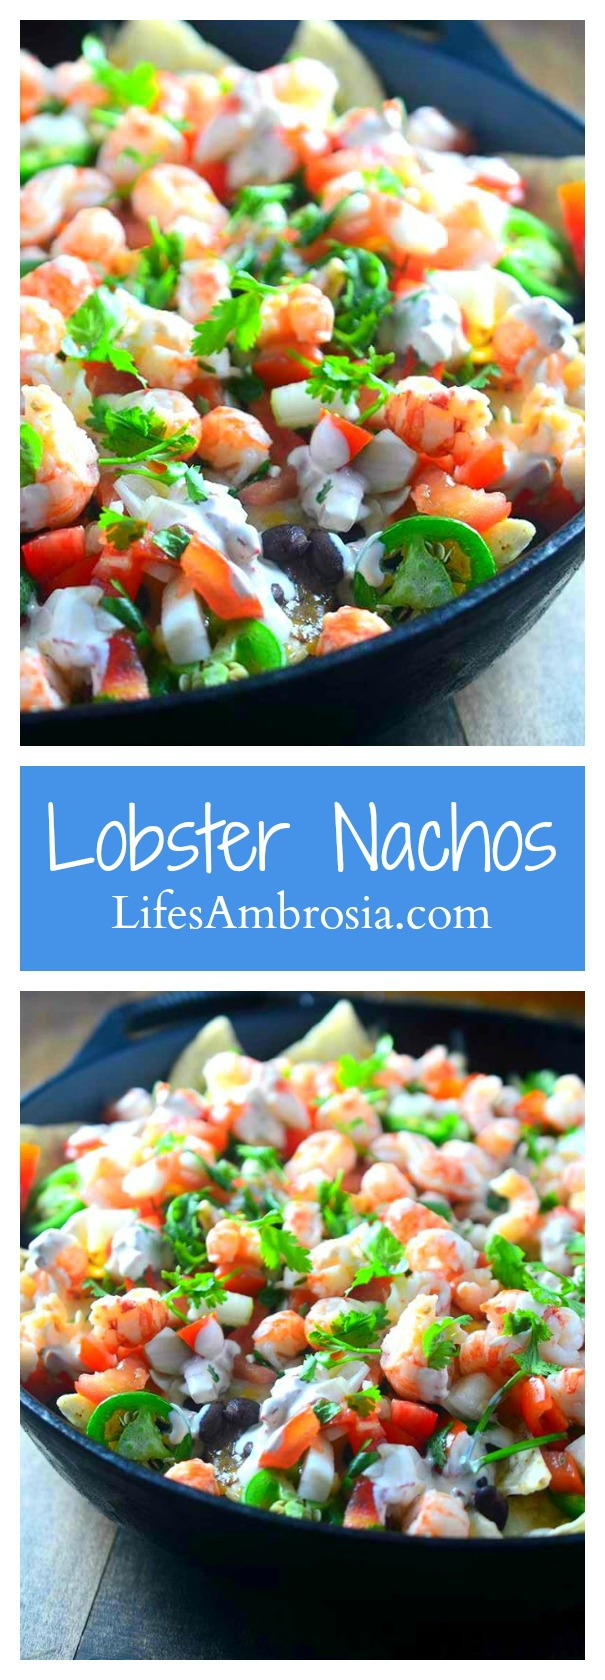 Lobster nachos are piled high with langoustine lobster tails, two kinds of cheese, black beans, homemade pico de gallo, jalapeños and a creamy chipotle sour cream.